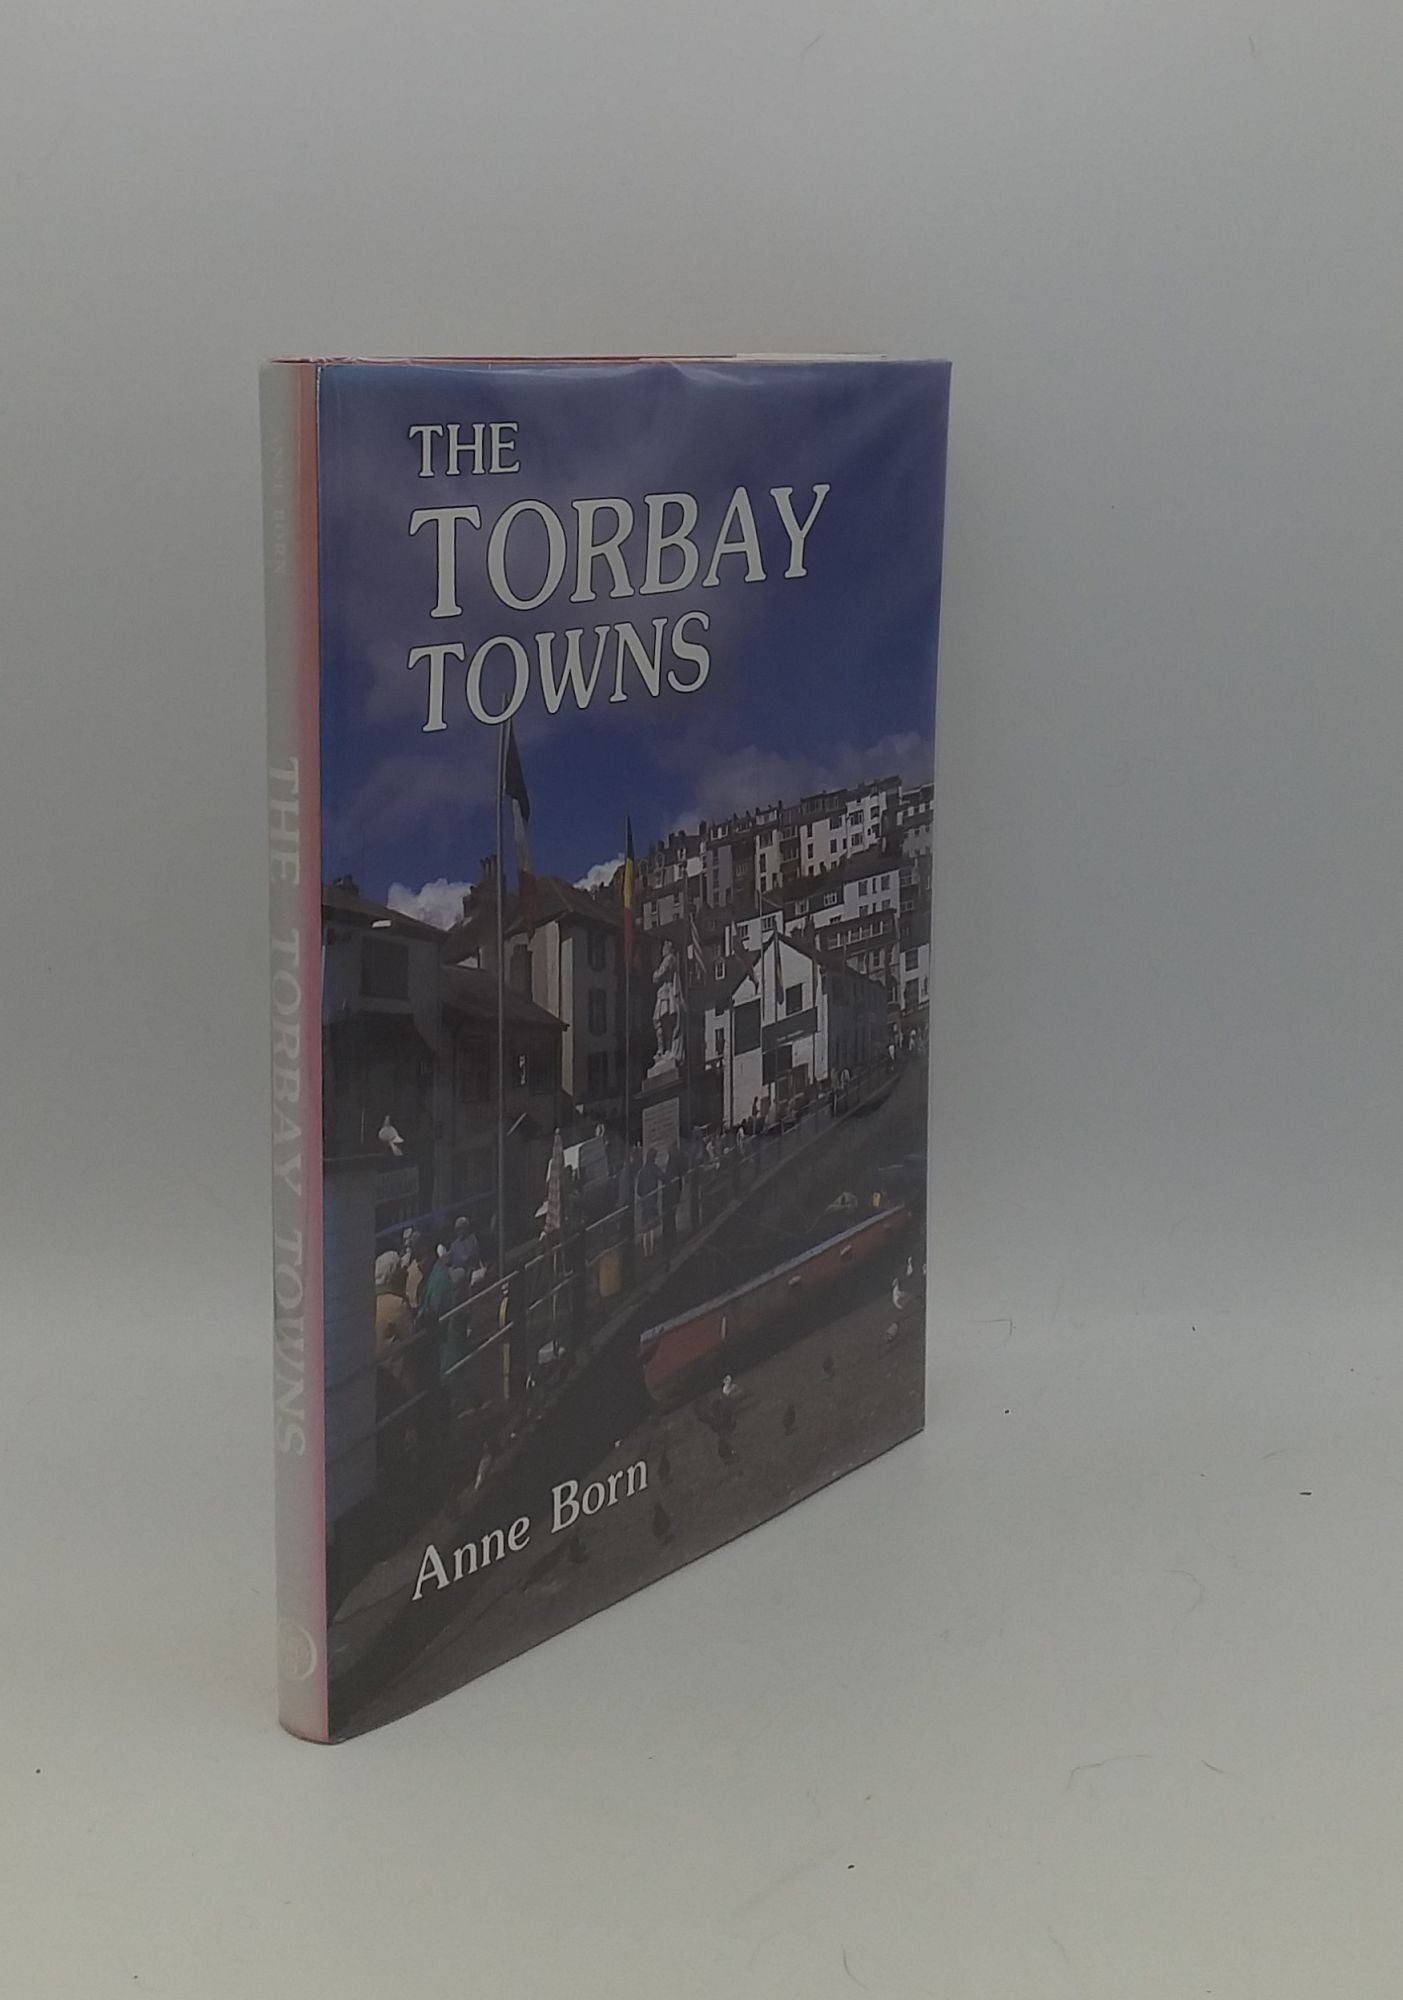 BORN Anne - The Torbay Towns